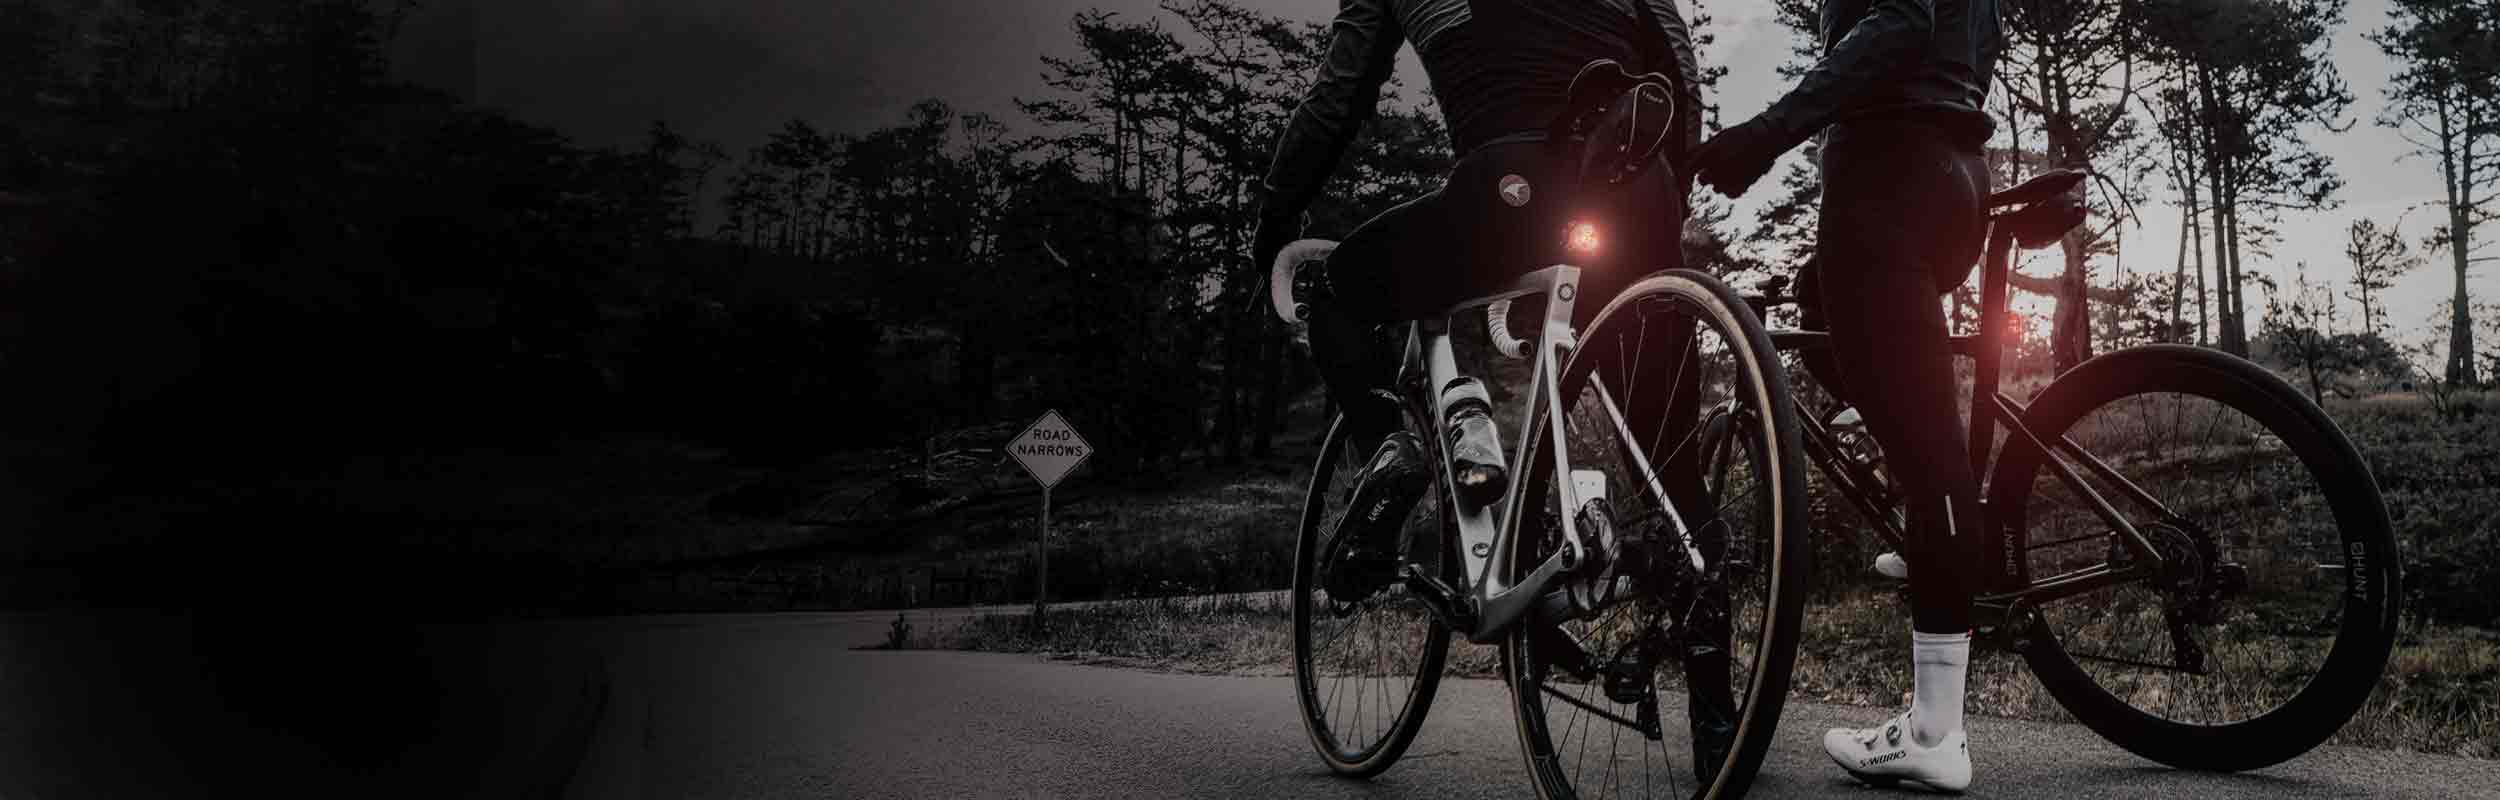 The bottom half of 2 bicycle riders stopped on the side of the road with bright rear lights mounted on their seat posts.